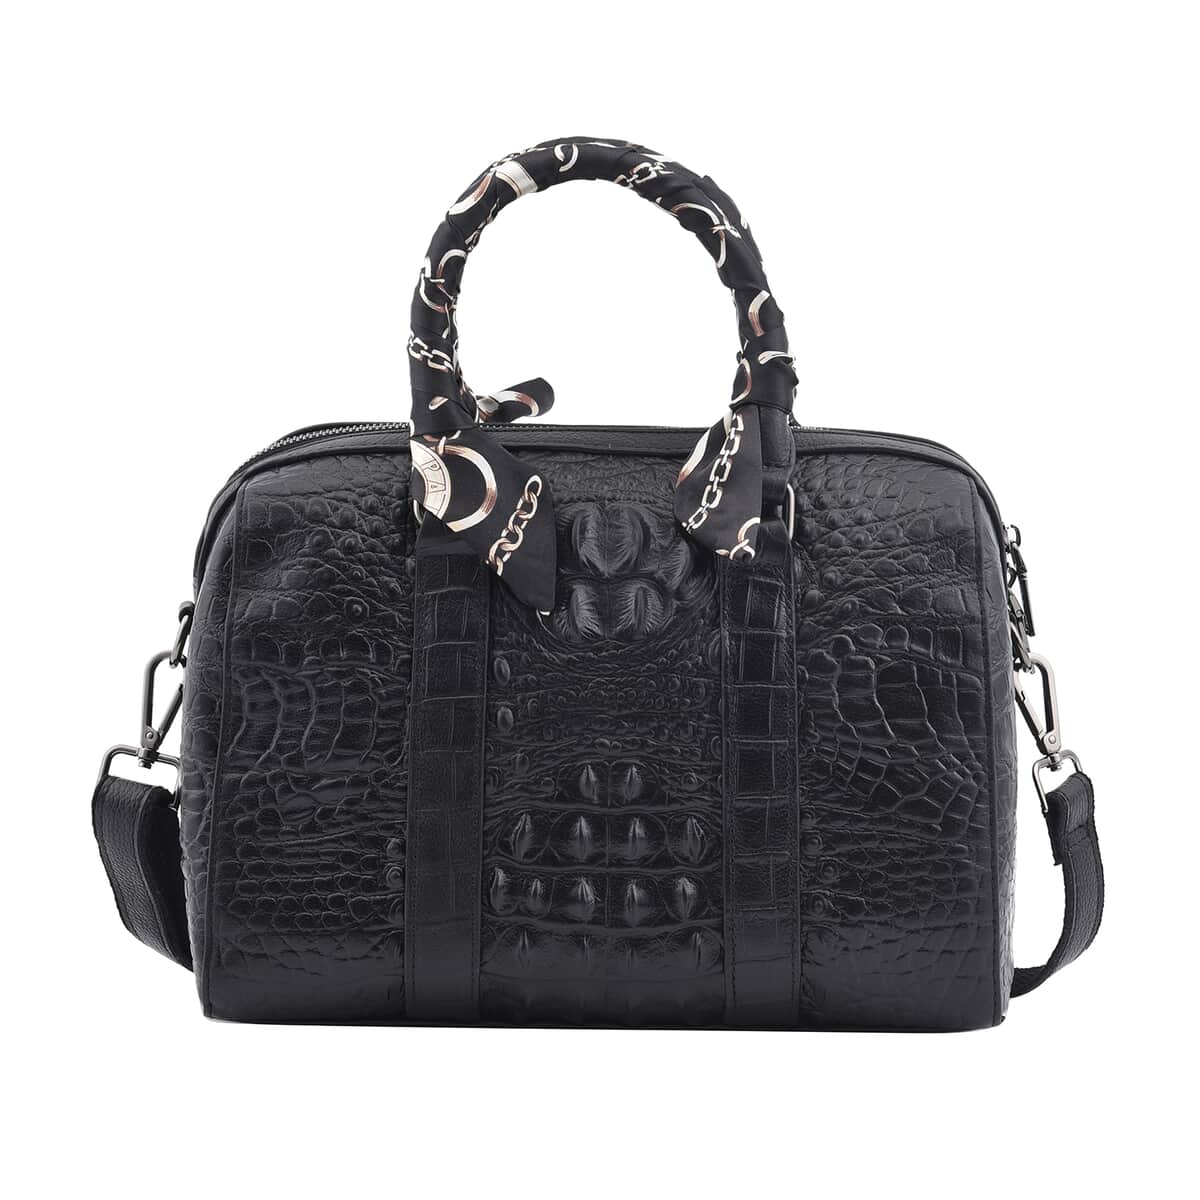 Black Croco Embossed Genuine Leather Tote Bag with Handle Drop and Shoulder Strap image number 0